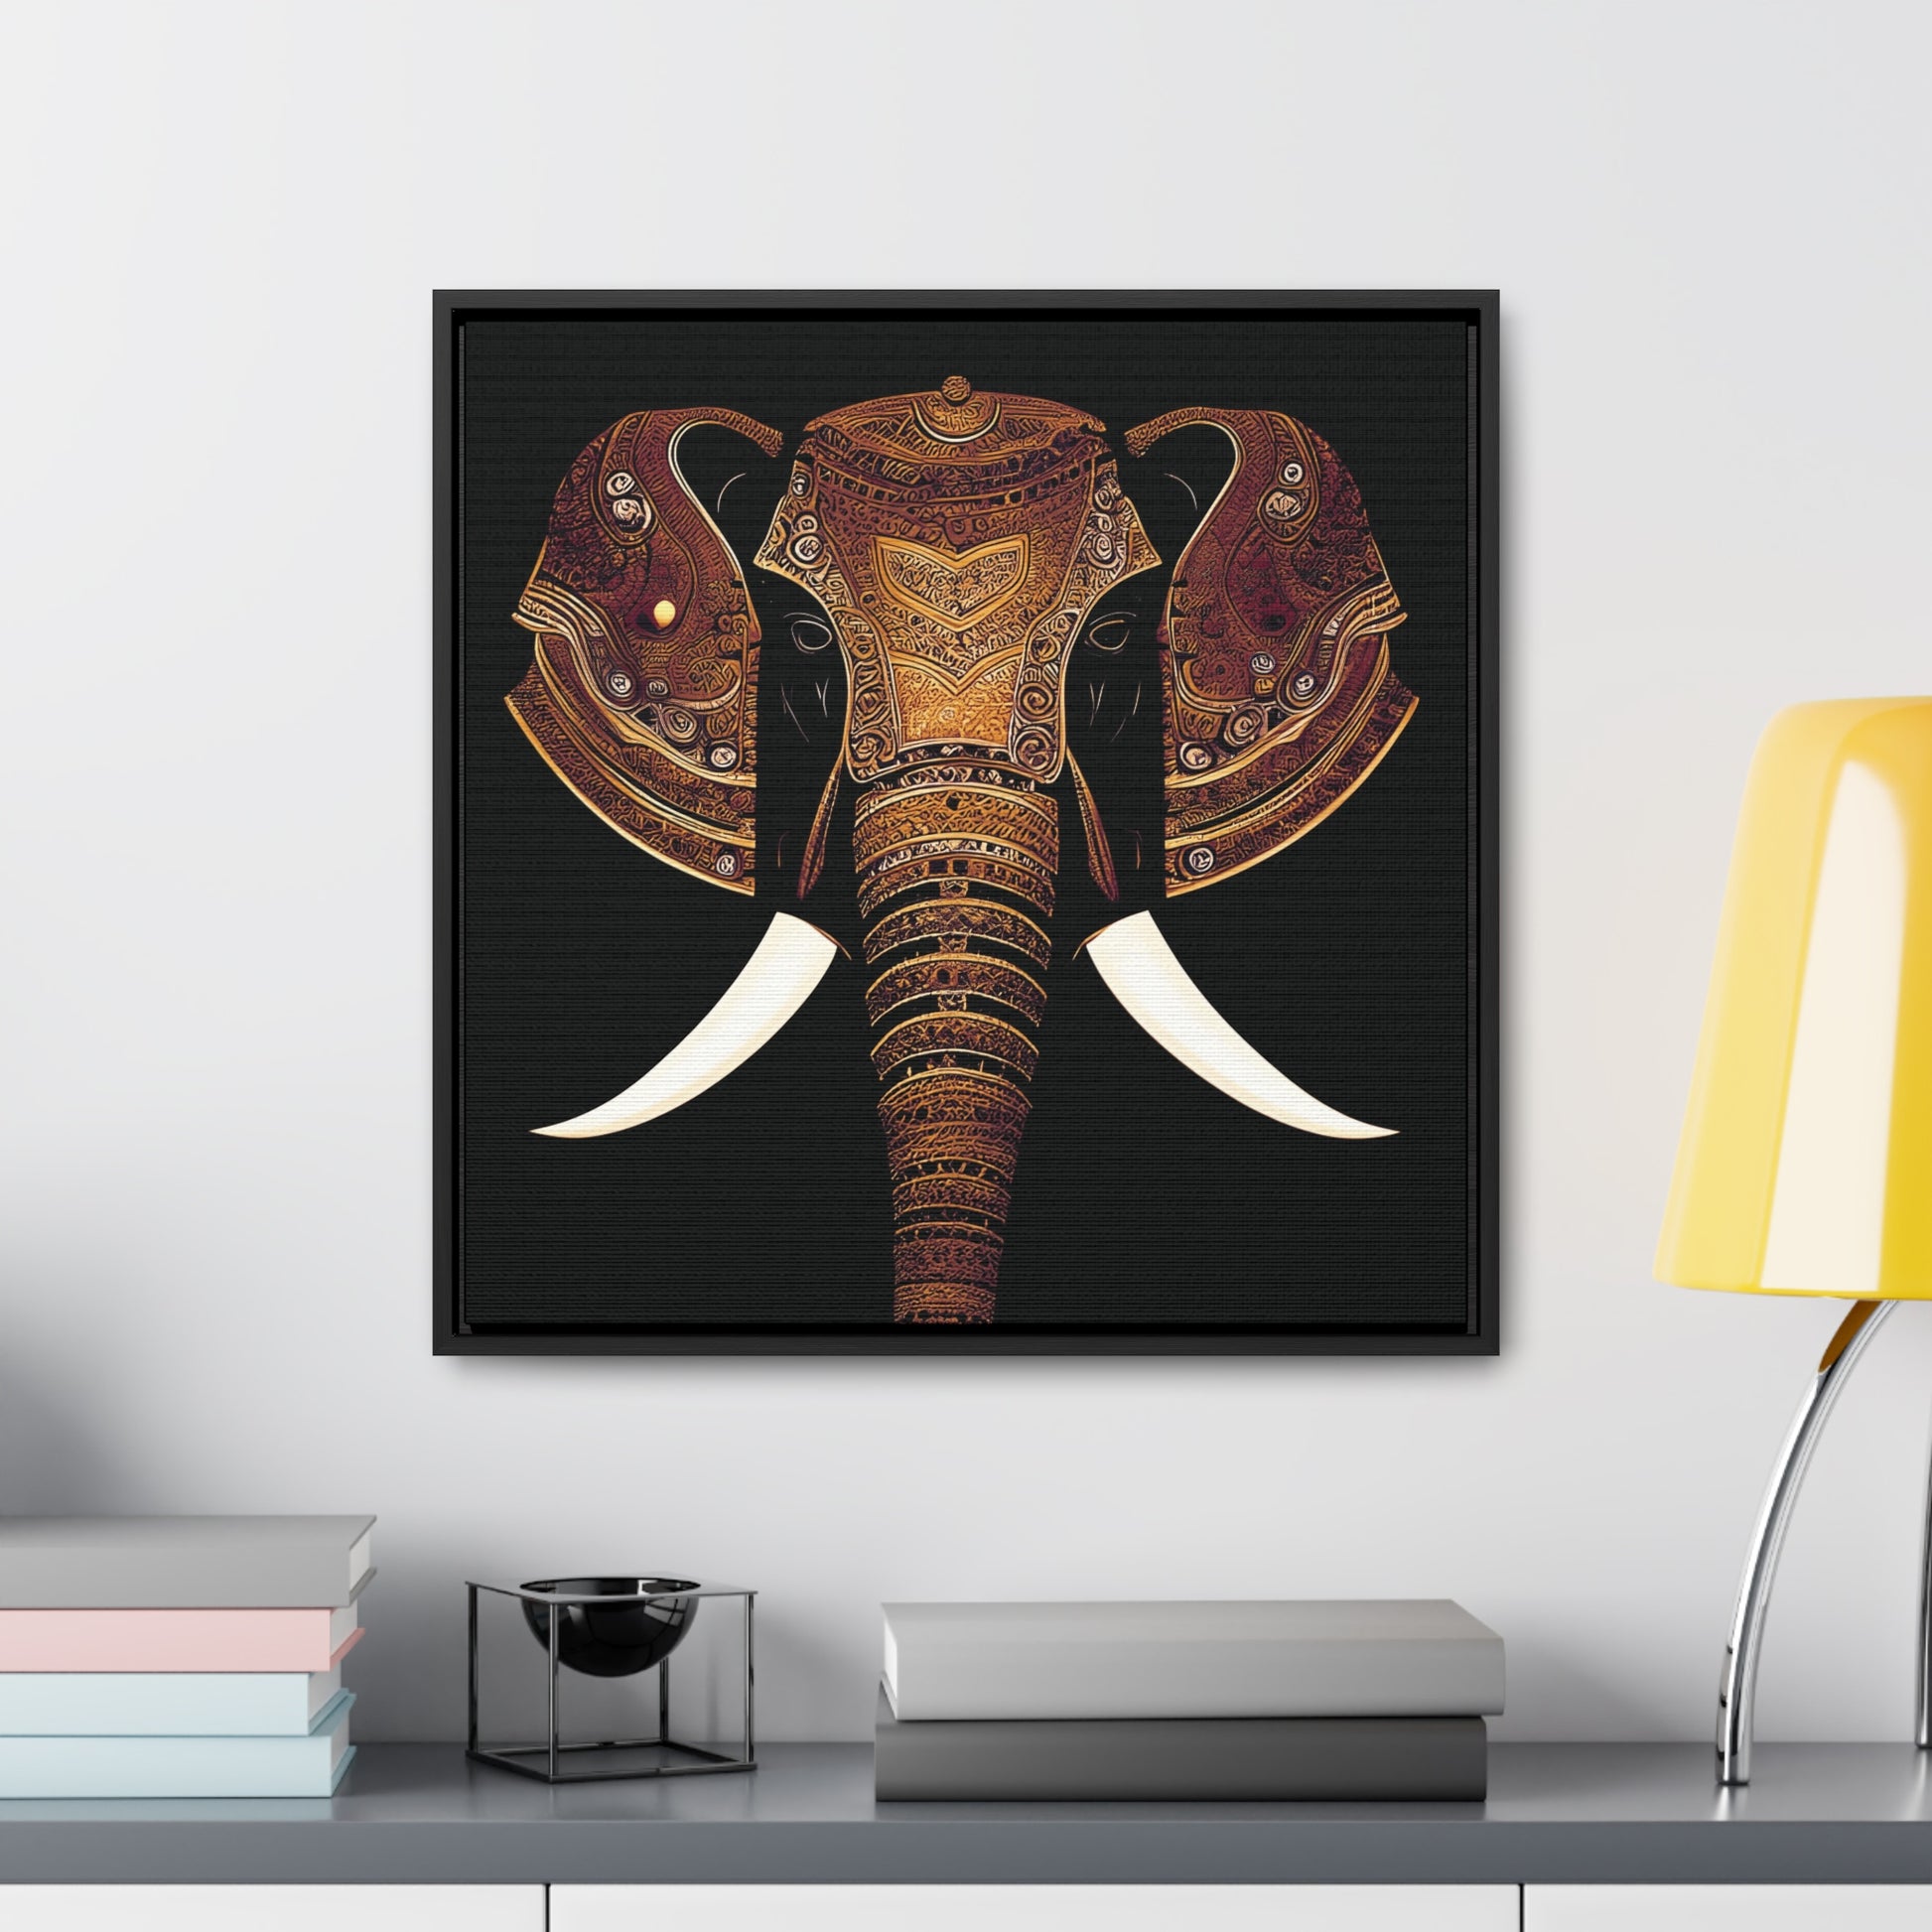 Indian Elephant Head With Parade Colors on Black Background Print on Canvas in a Floating Frame 24x24